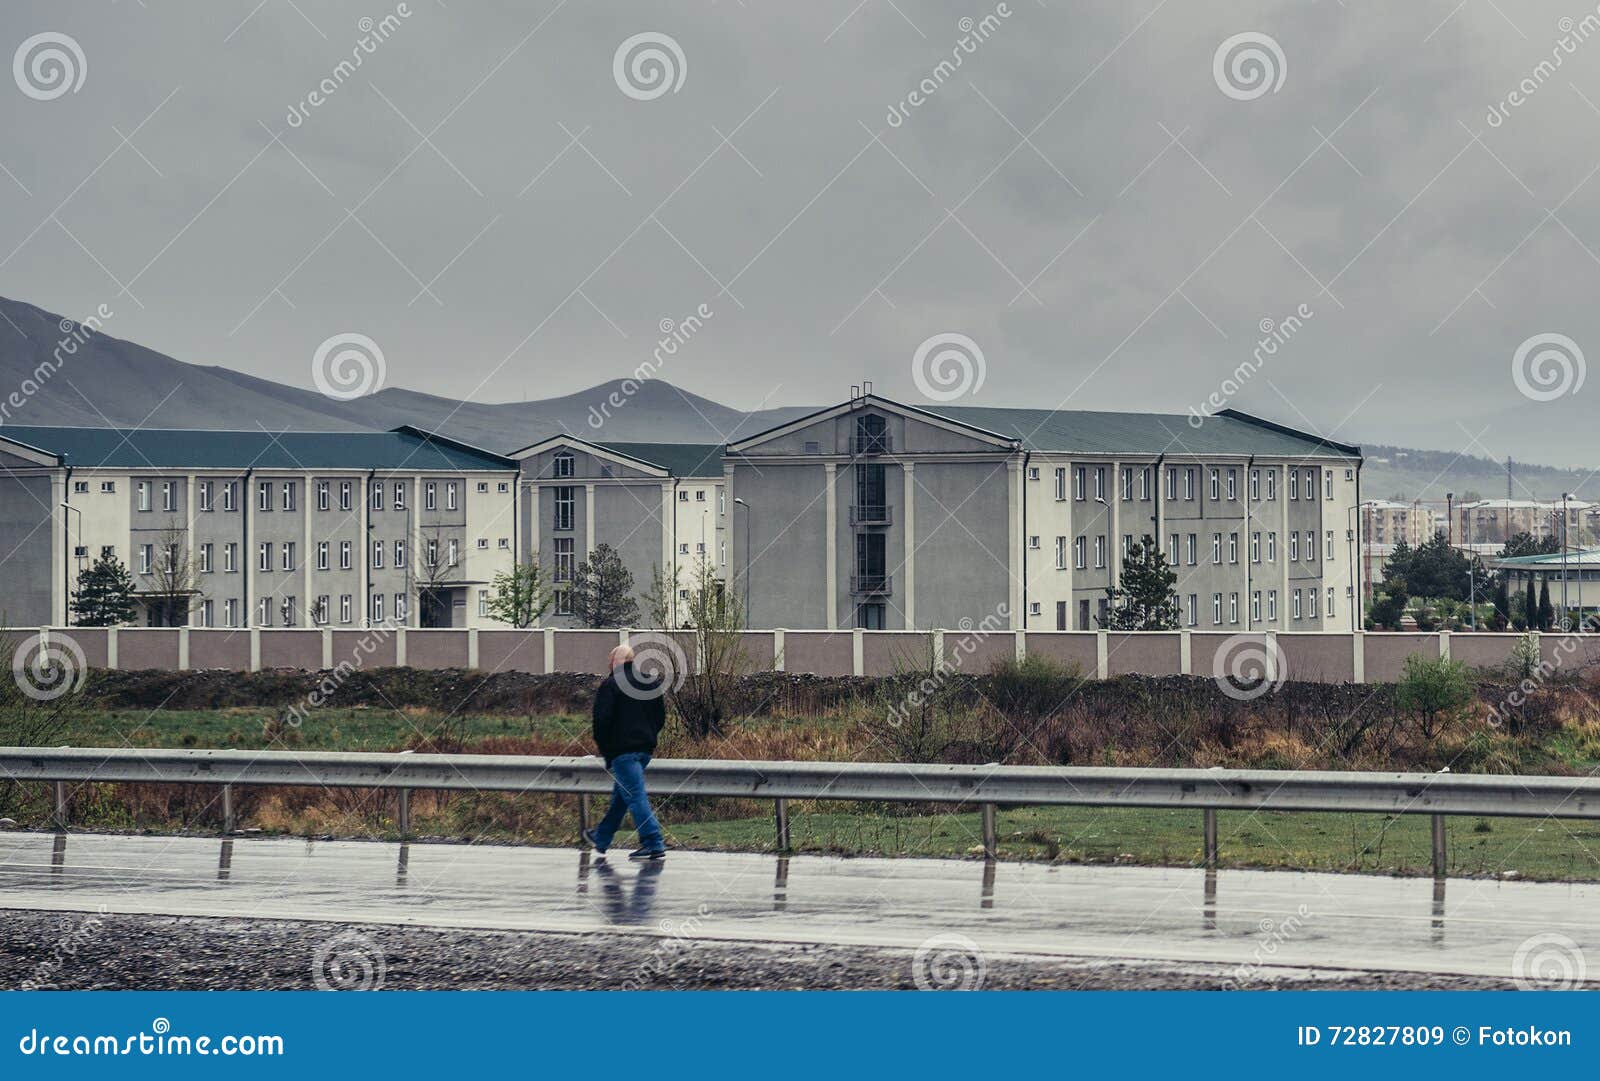 Military Base In Gori Editorial Stock Image. Image Of Russian - 72827809